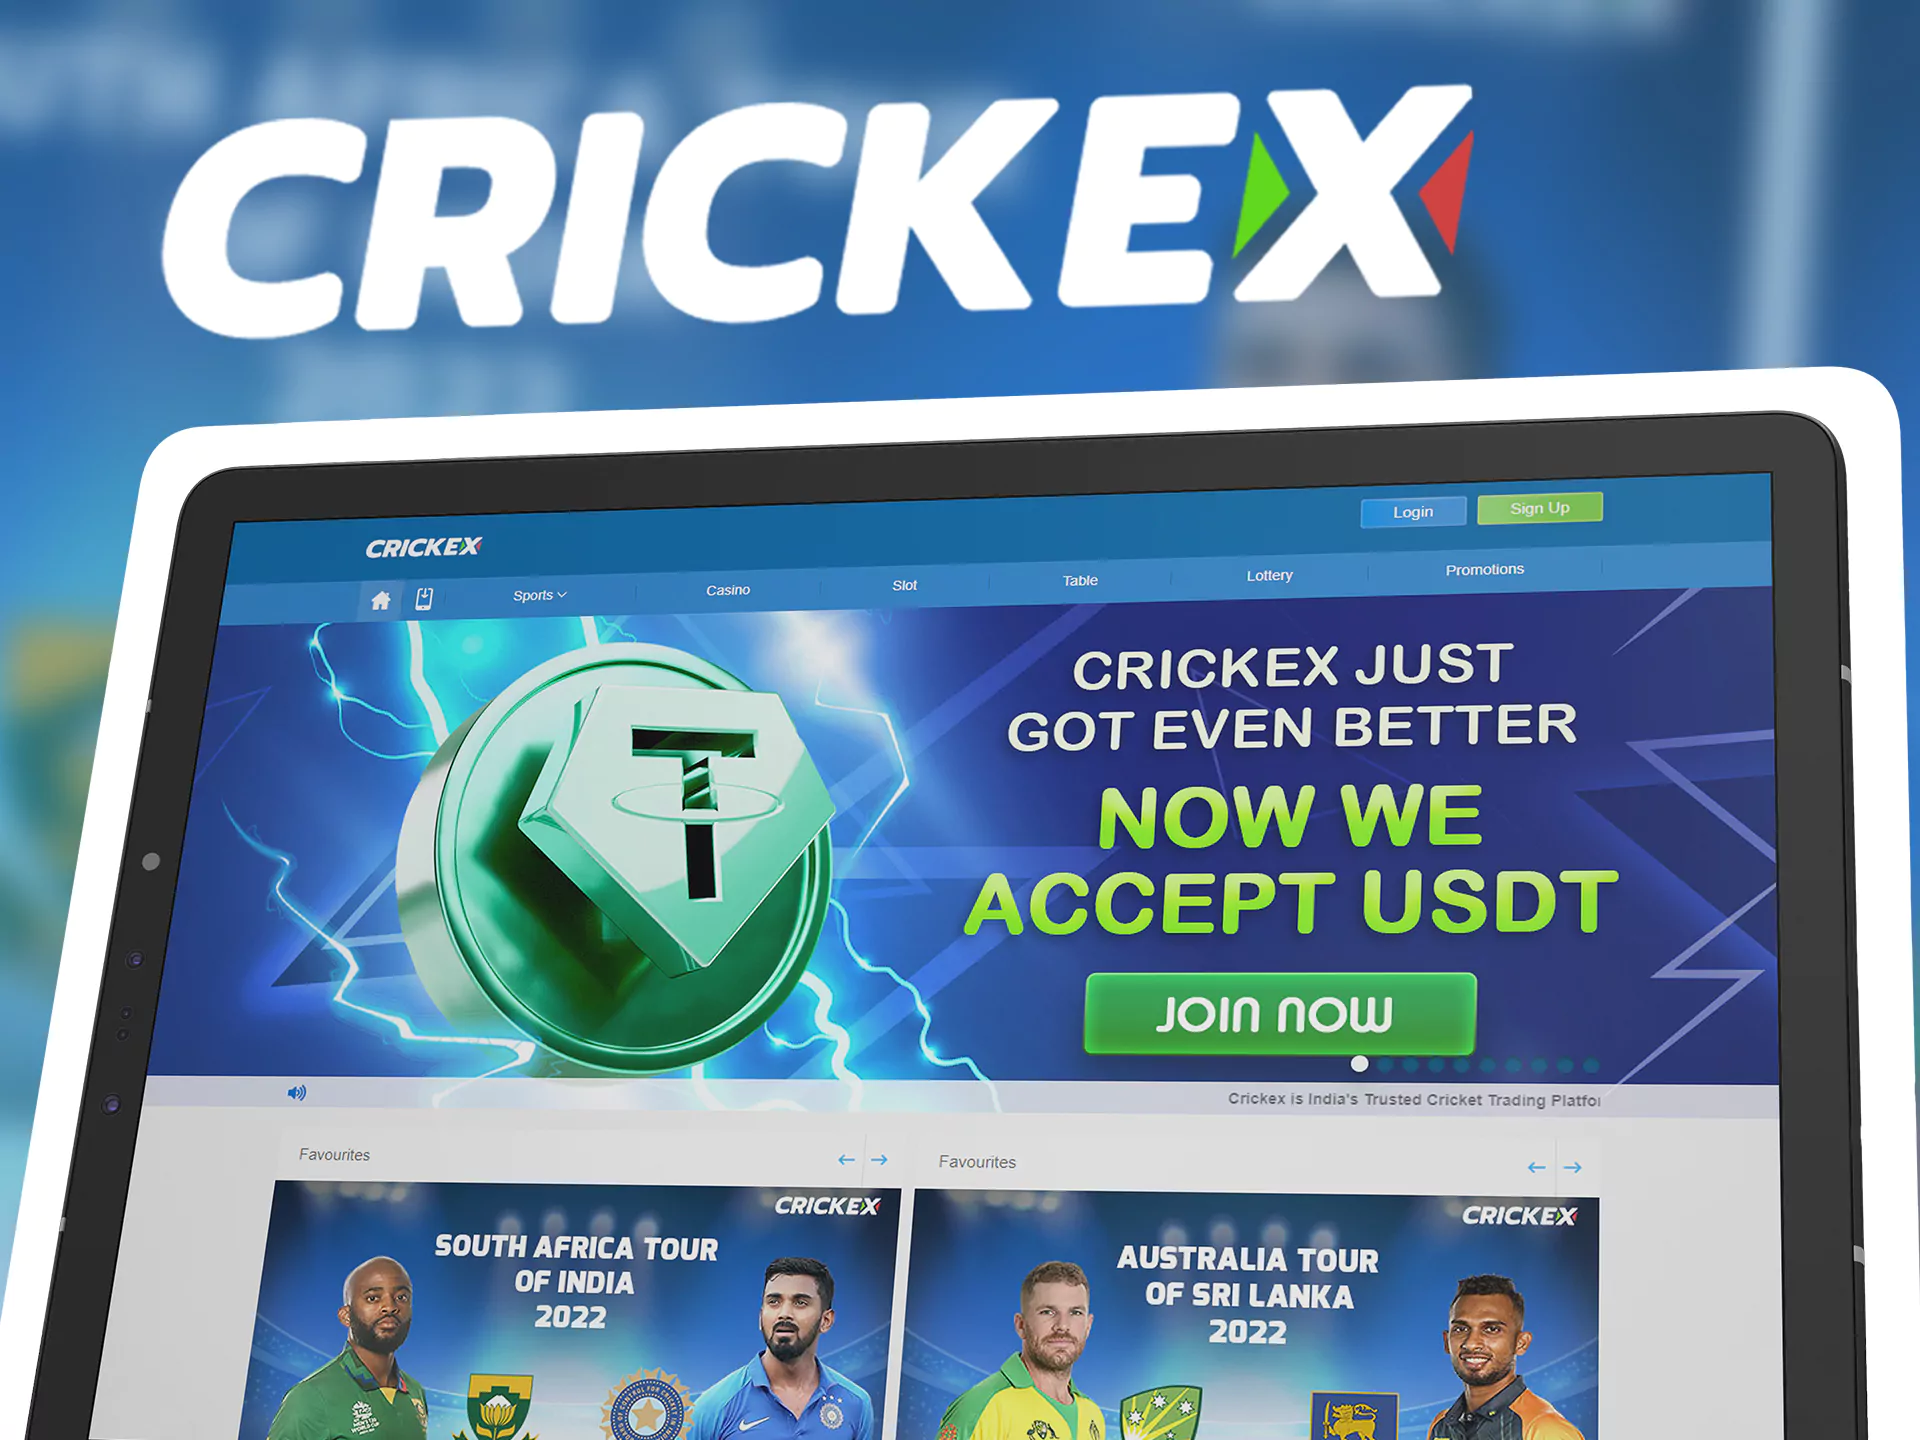 The mobile version of the Crickex website is available for all smartphones.